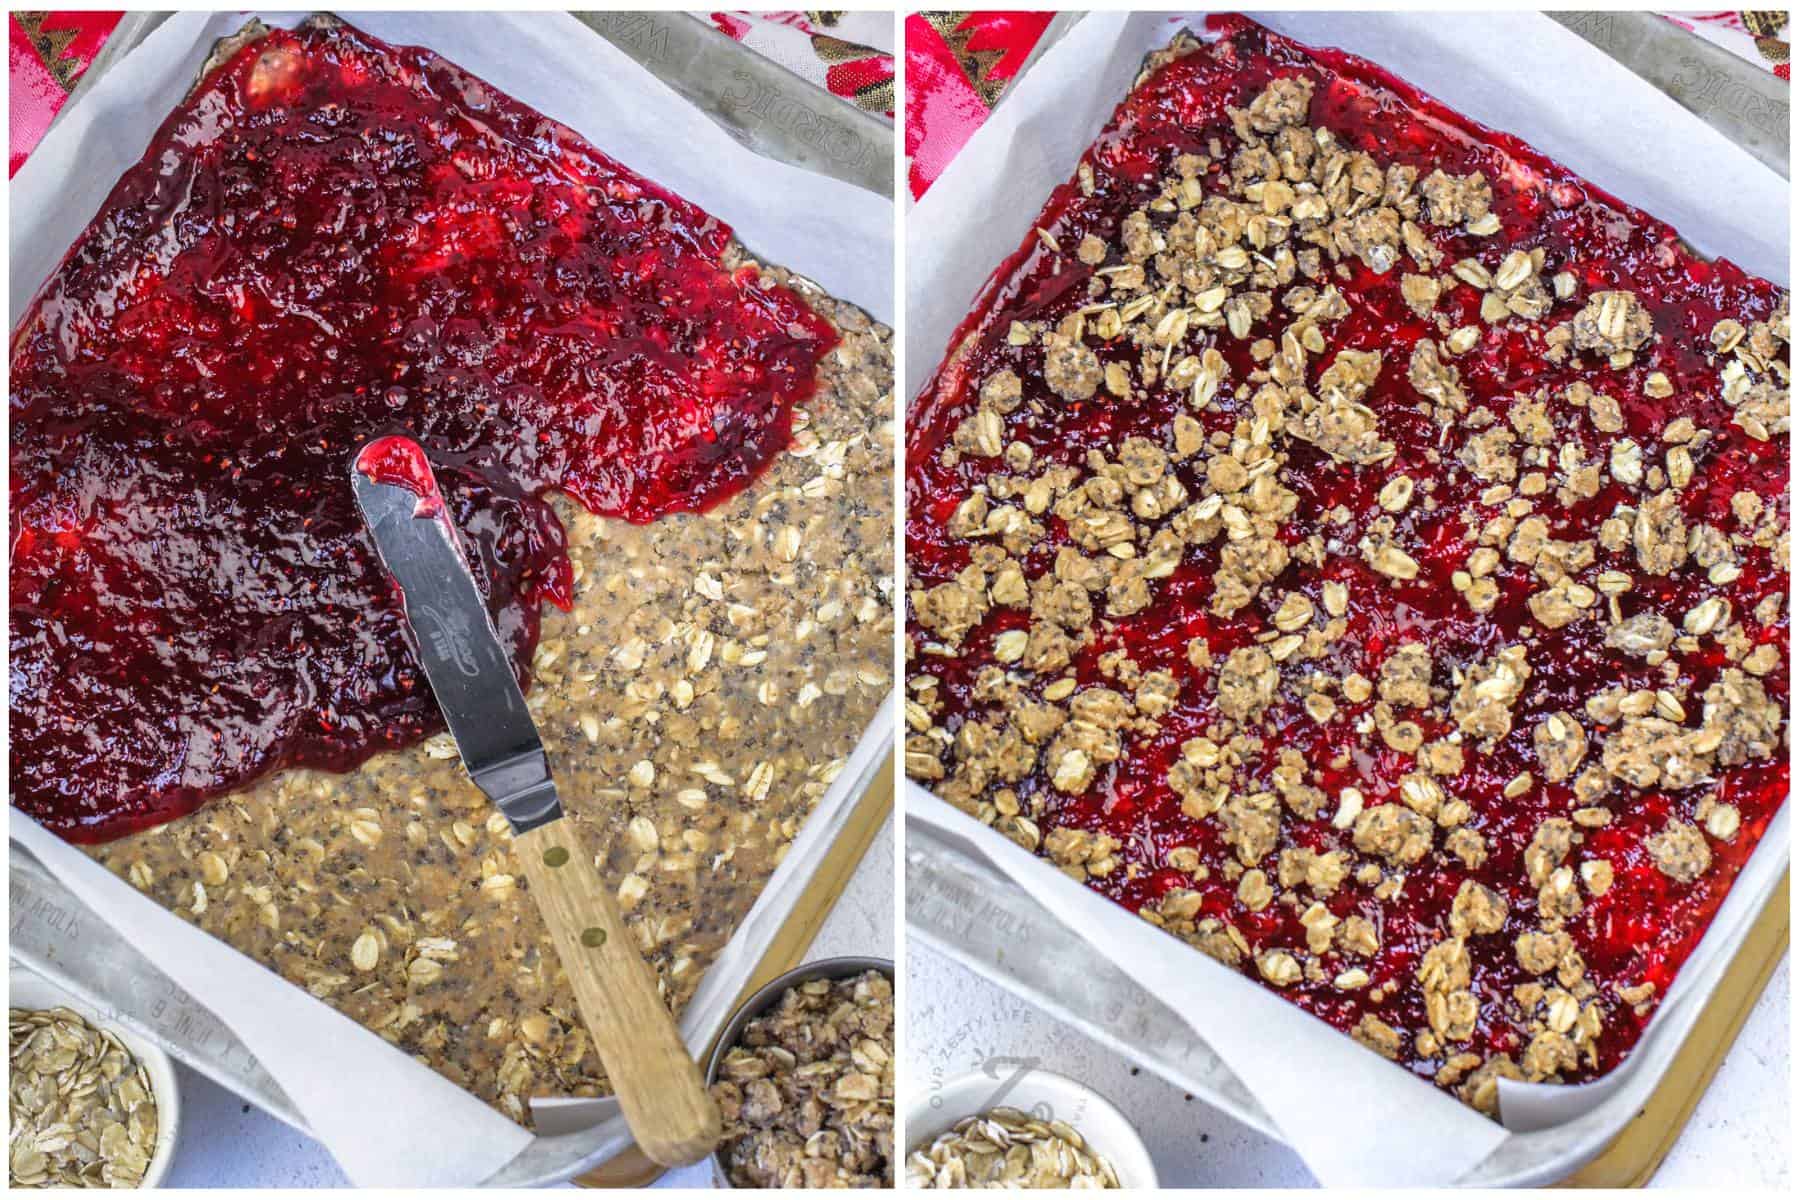 process of adding jam and oats to Raspberry Oat Bars